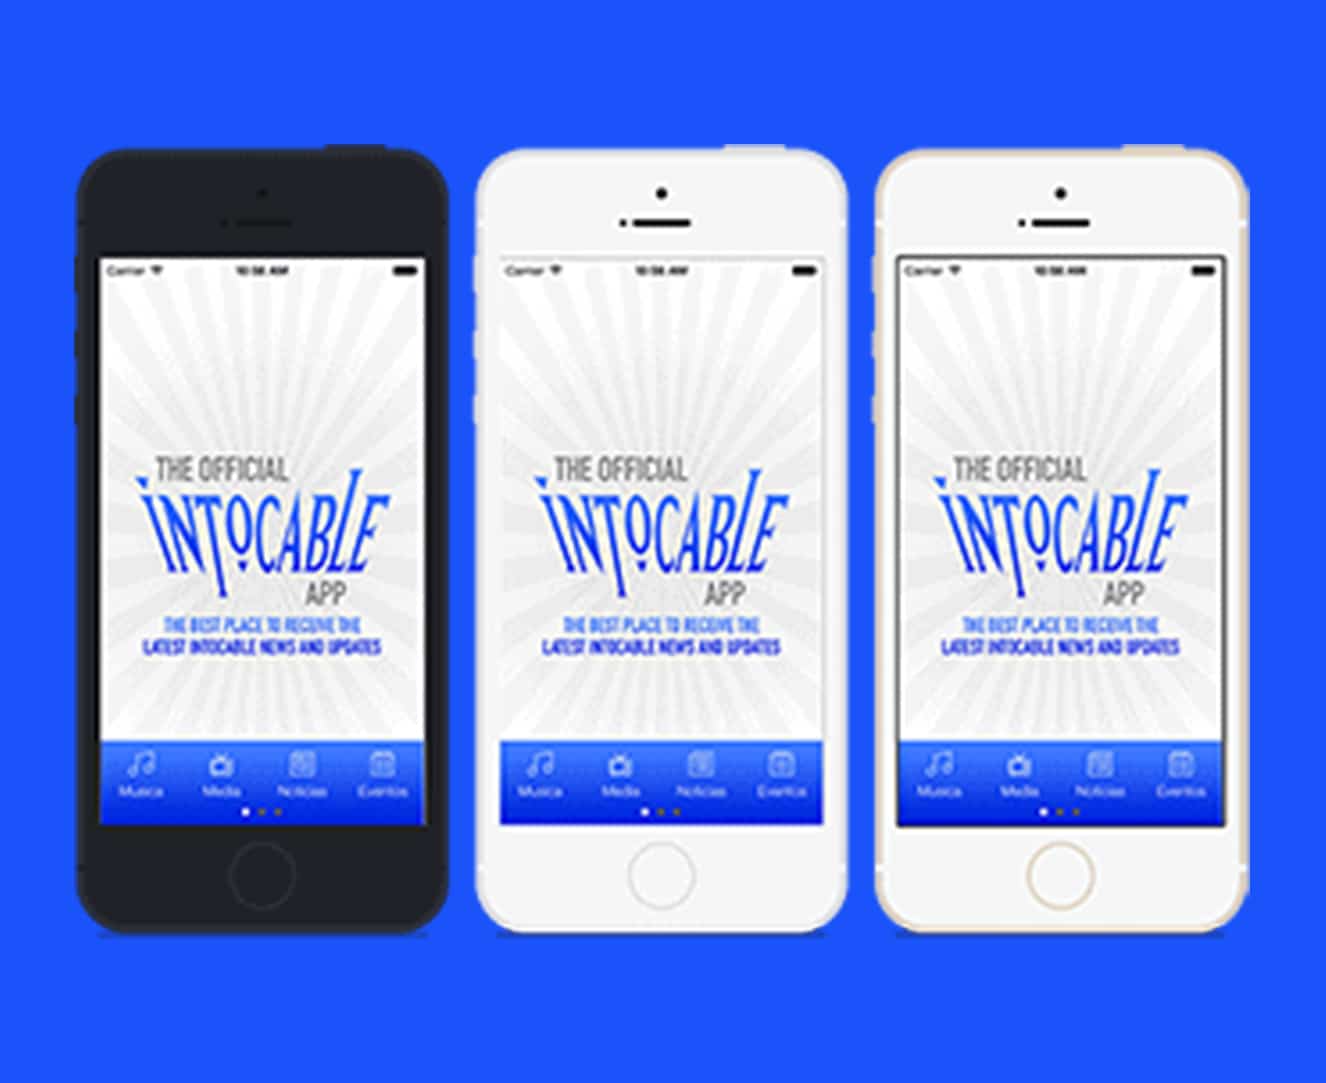 Intocable Image